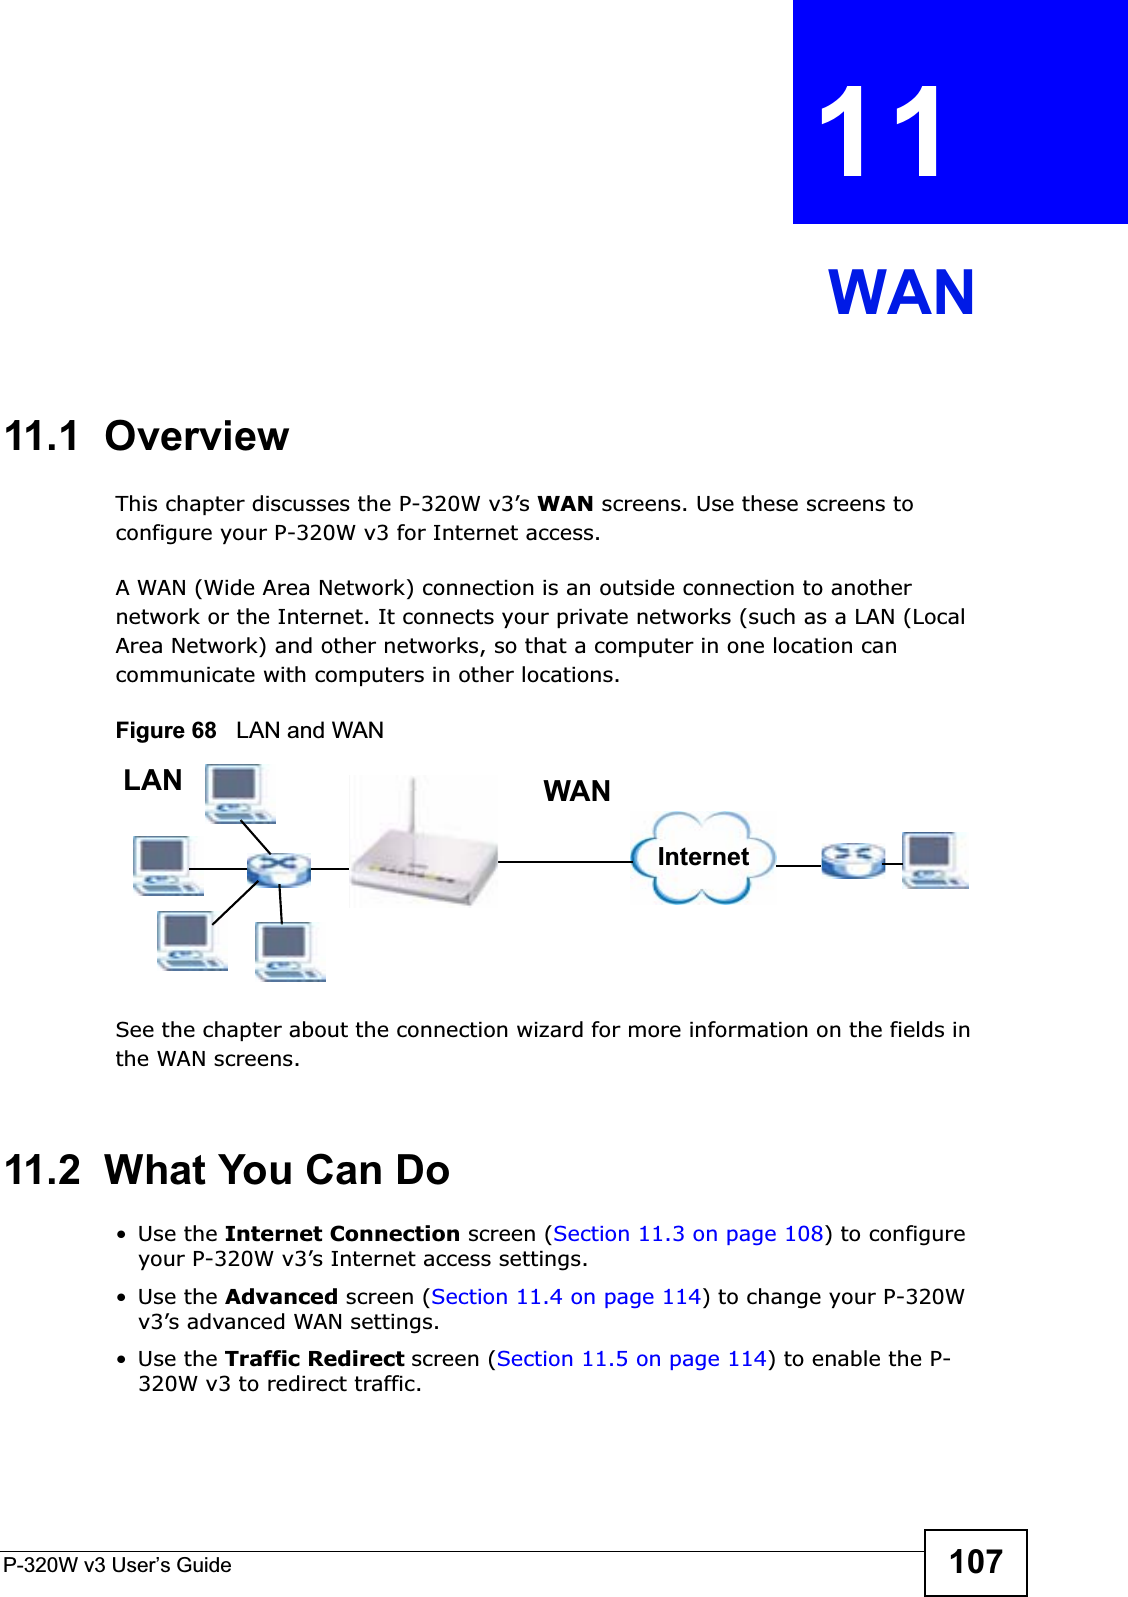 P-320W v3 User’s Guide 107CHAPTER 11 WAN11.1  OverviewThis chapter discusses the P-320W v3’s WAN screens. Use these screens to configure your P-320W v3 for Internet access.A WAN (Wide Area Network) connection is an outside connection to another network or the Internet. It connects your private networks (such as a LAN (Local Area Network) and other networks, so that a computer in one location can communicate with computers in other locations.Figure 68   LAN and WANSee the chapter about the connection wizard for more information on the fields in the WAN screens.11.2  What You Can Do•Use the Internet Connection screen (Section 11.3 on page 108) to configure your P-320W v3’s Internet access settings.•Use the Advanced screen (Section 11.4 on page 114) to change your P-320W v3’s advanced WAN settings.•Use the Traffic Redirect screen (Section 11.5 on page 114) to enable the P-320W v3 to redirect traffic.WANLANInternet